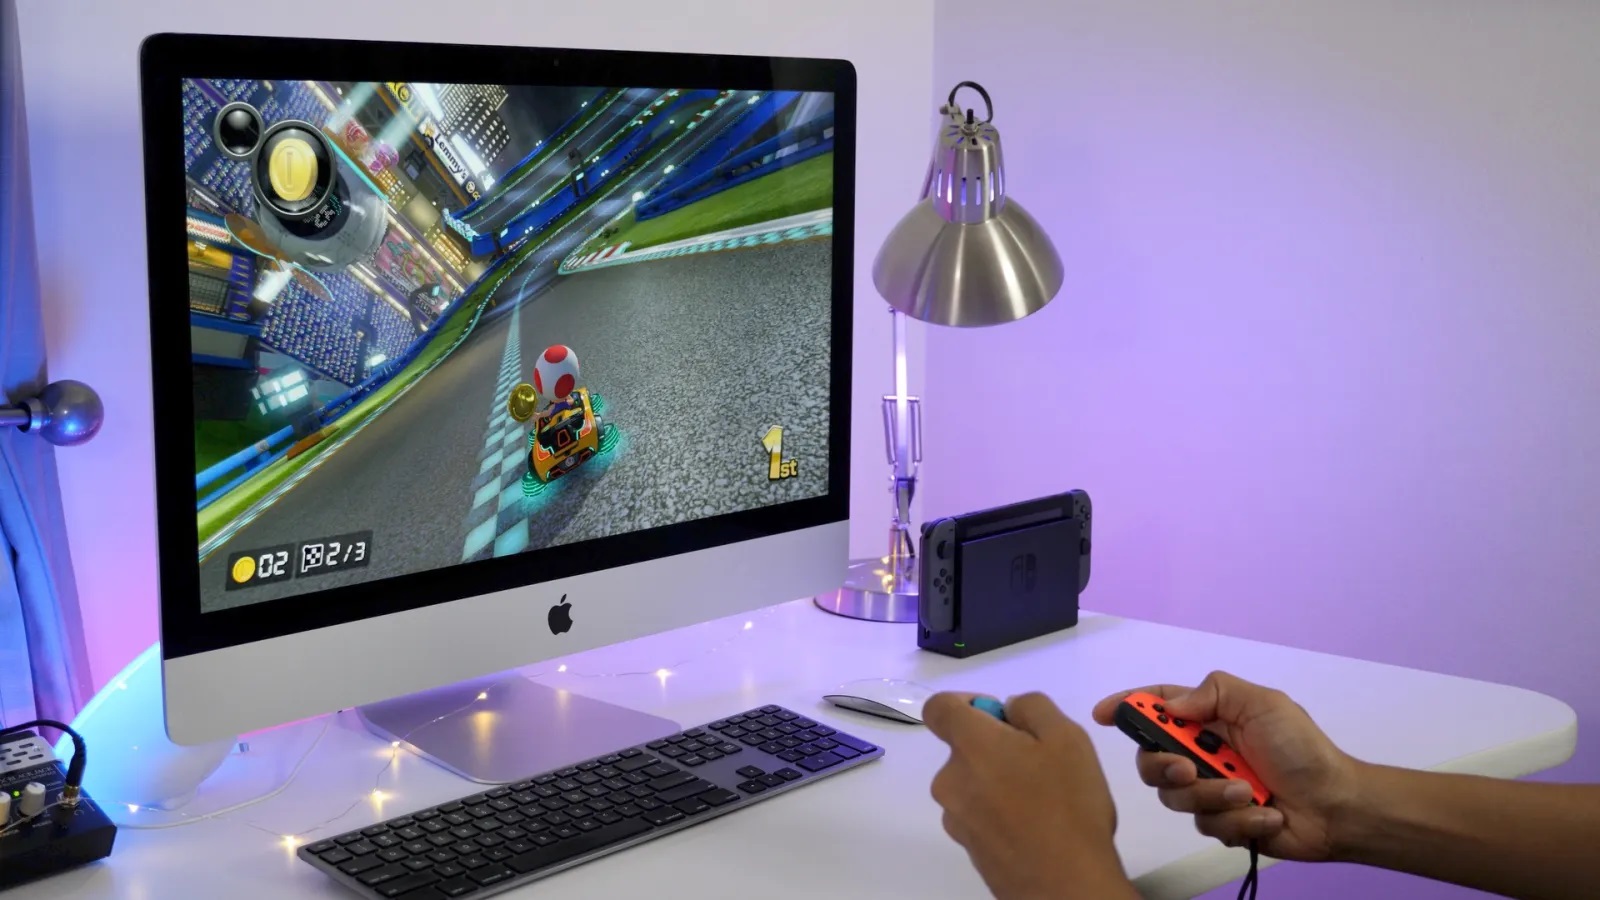 How To Connect A Nintendo Switch To A PC